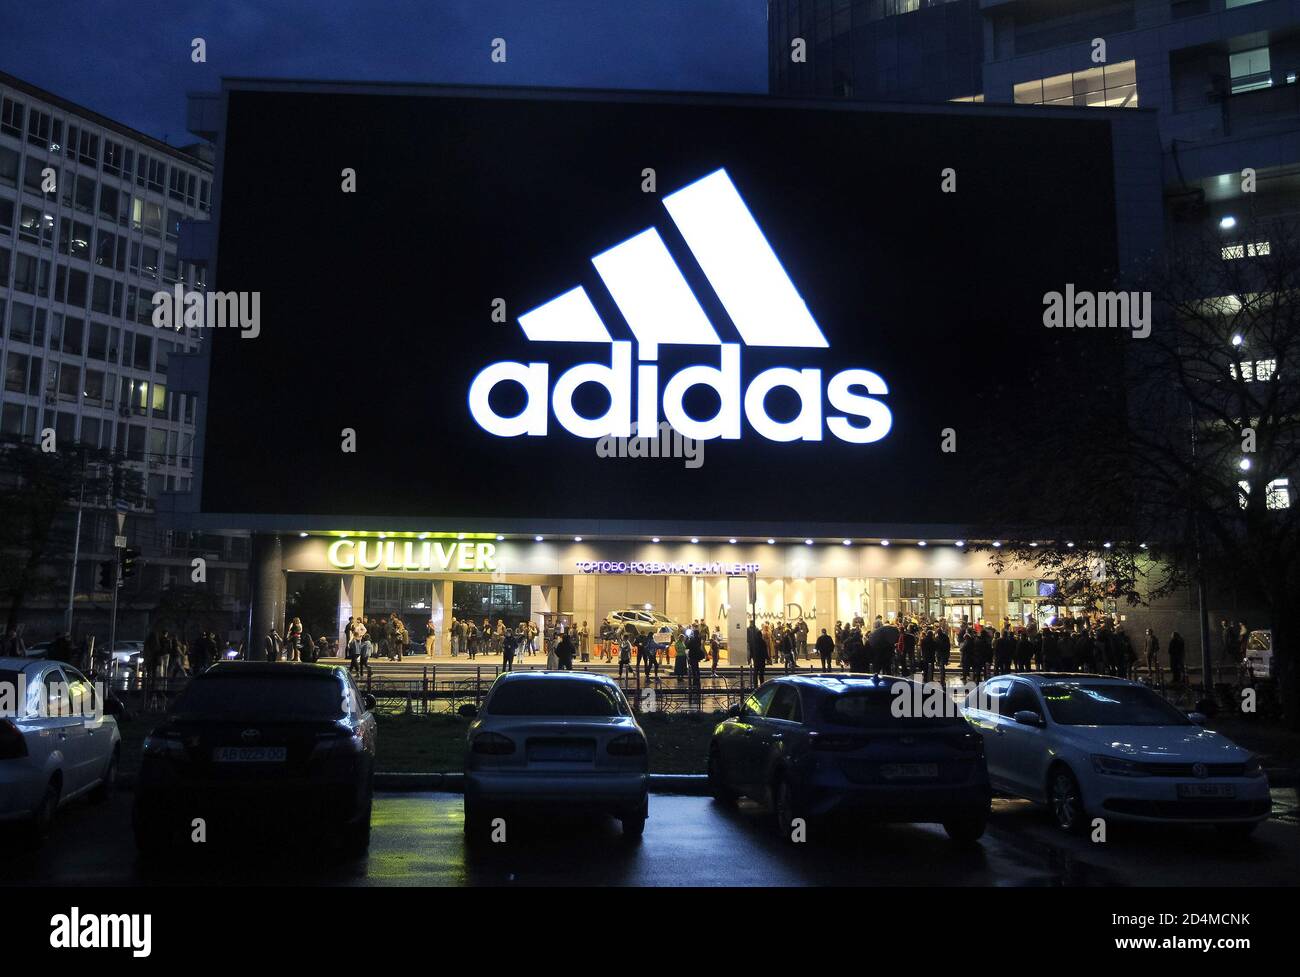 A huge screen shows the logo Adidas on a shopping mall building in downtown  Kiev Stock Photo - Alamy